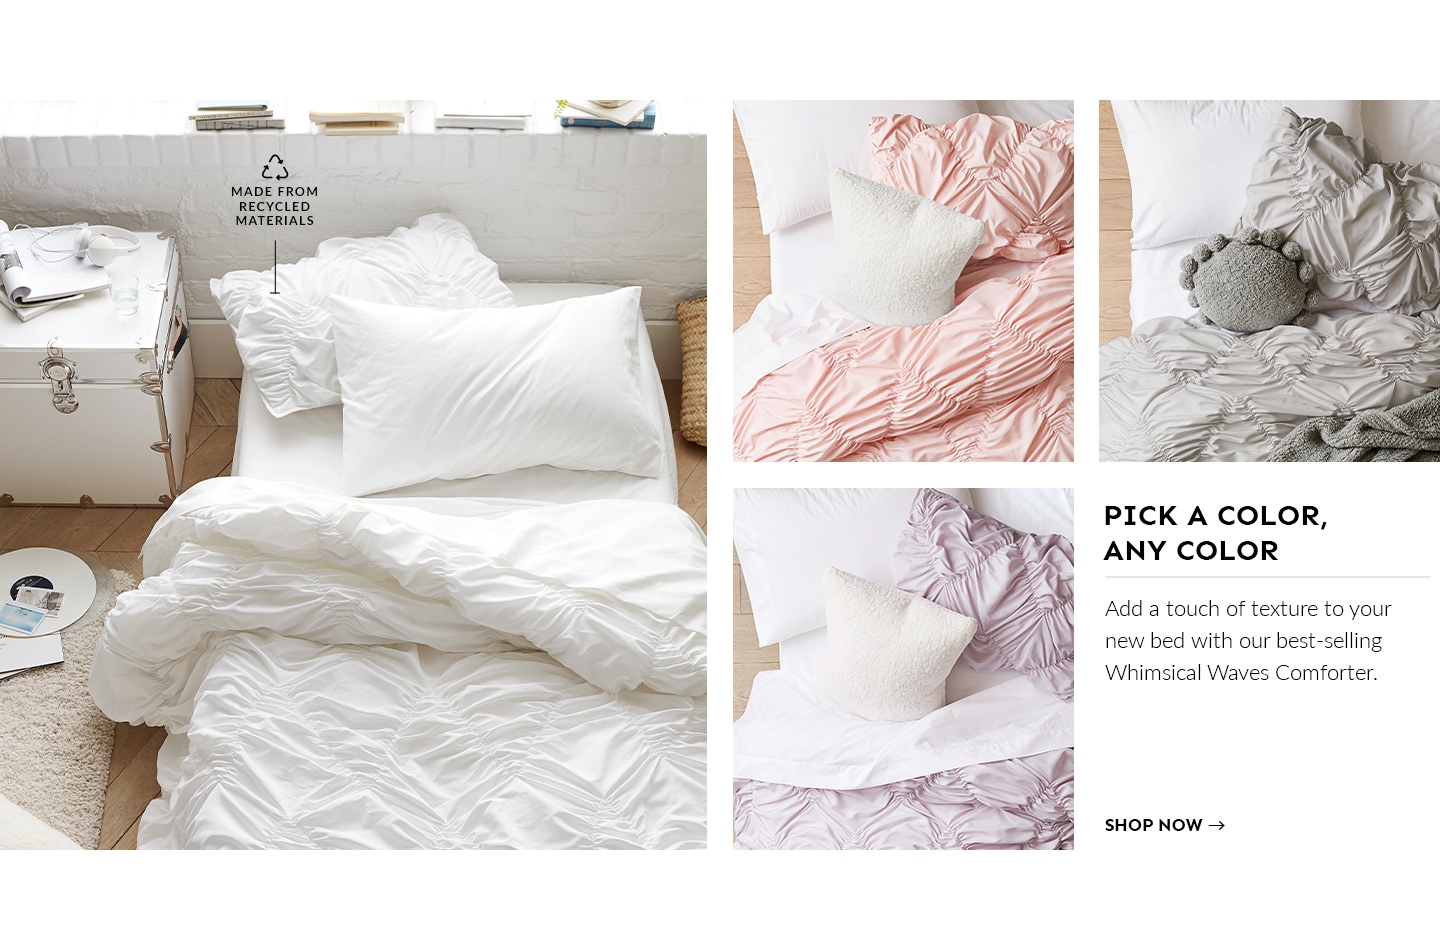 Whimsical Waves Comforter – Shop Now